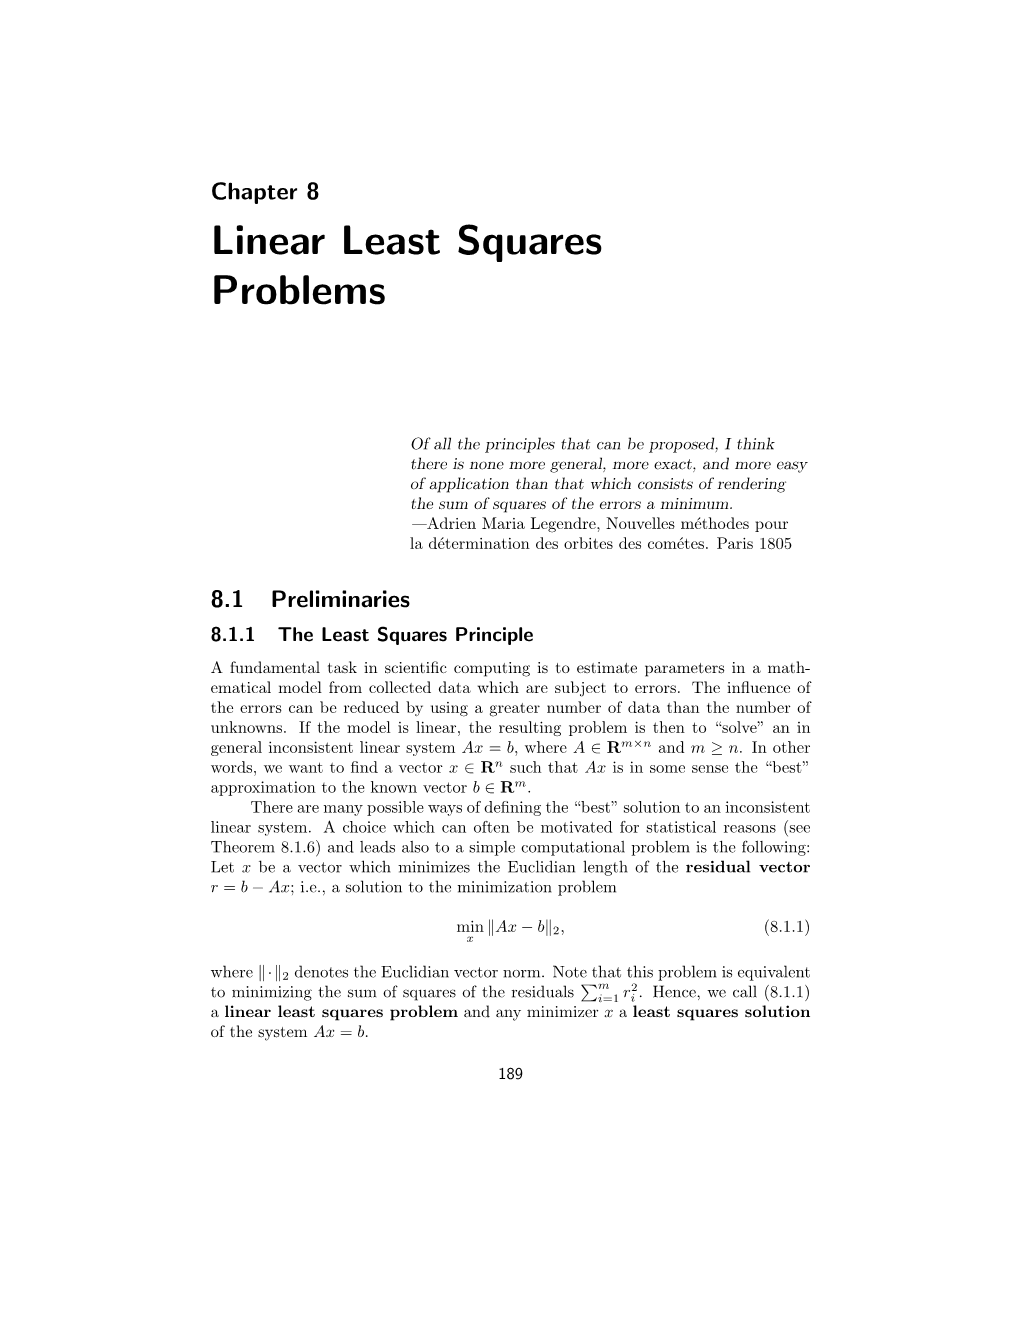 Linear Least Squares Problems